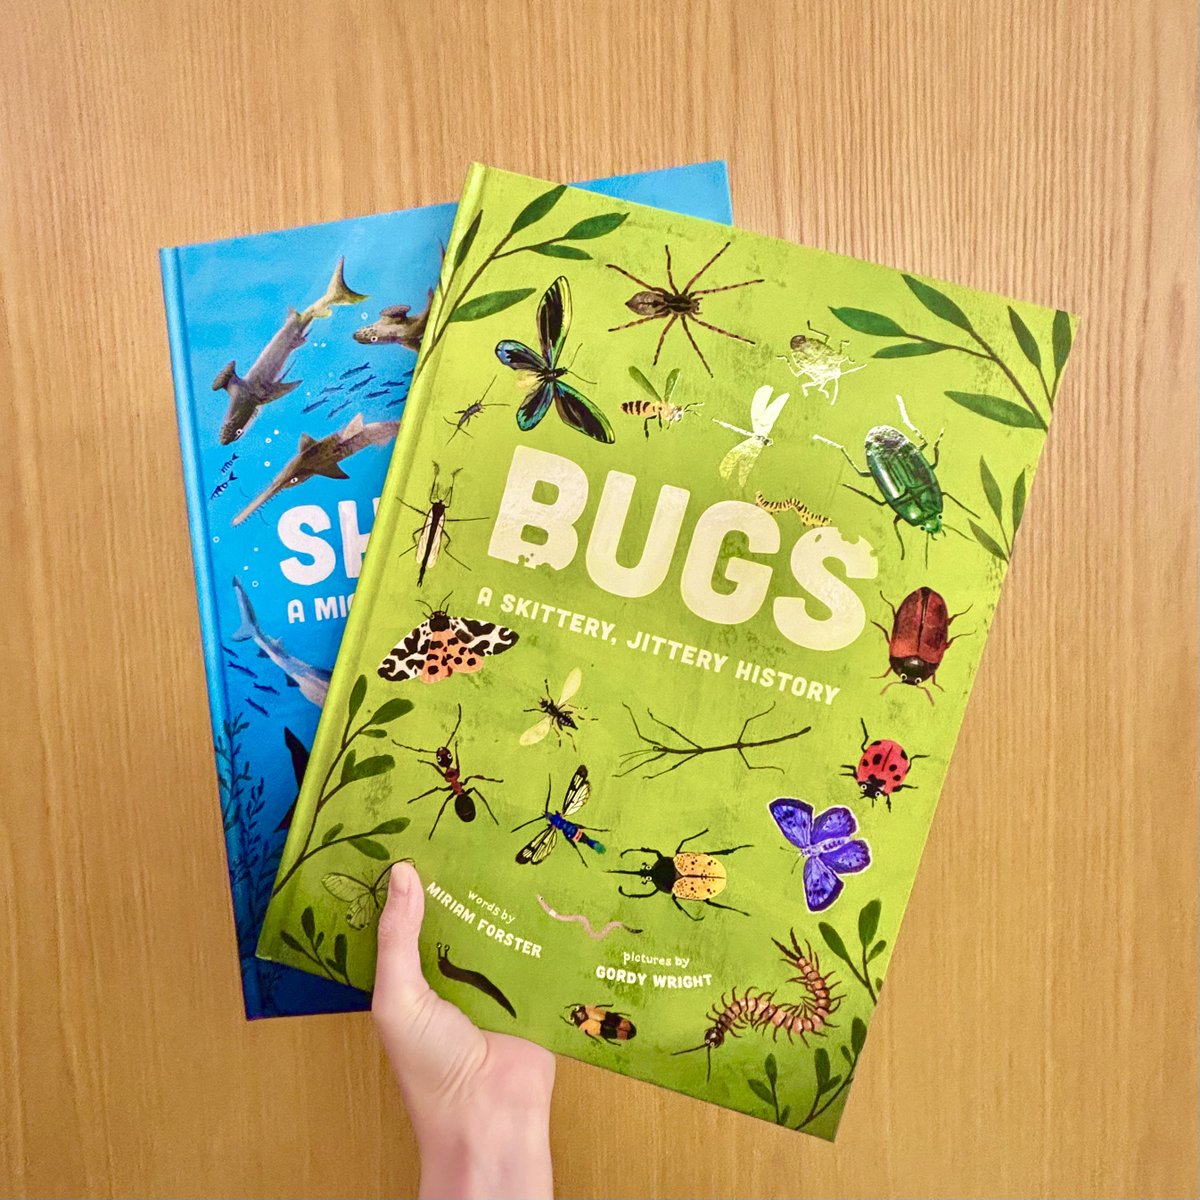 From @MiriamForster and @GordyJWright comes BUGS: A SKITTERY, JITTERY HISTORY! Learn all about bugs in this epic nonfiction picture book that’s perfect for anyone who loves to discover more about the world around them! Grab a copy today! #BookBirthday bit.ly/49yNiiR